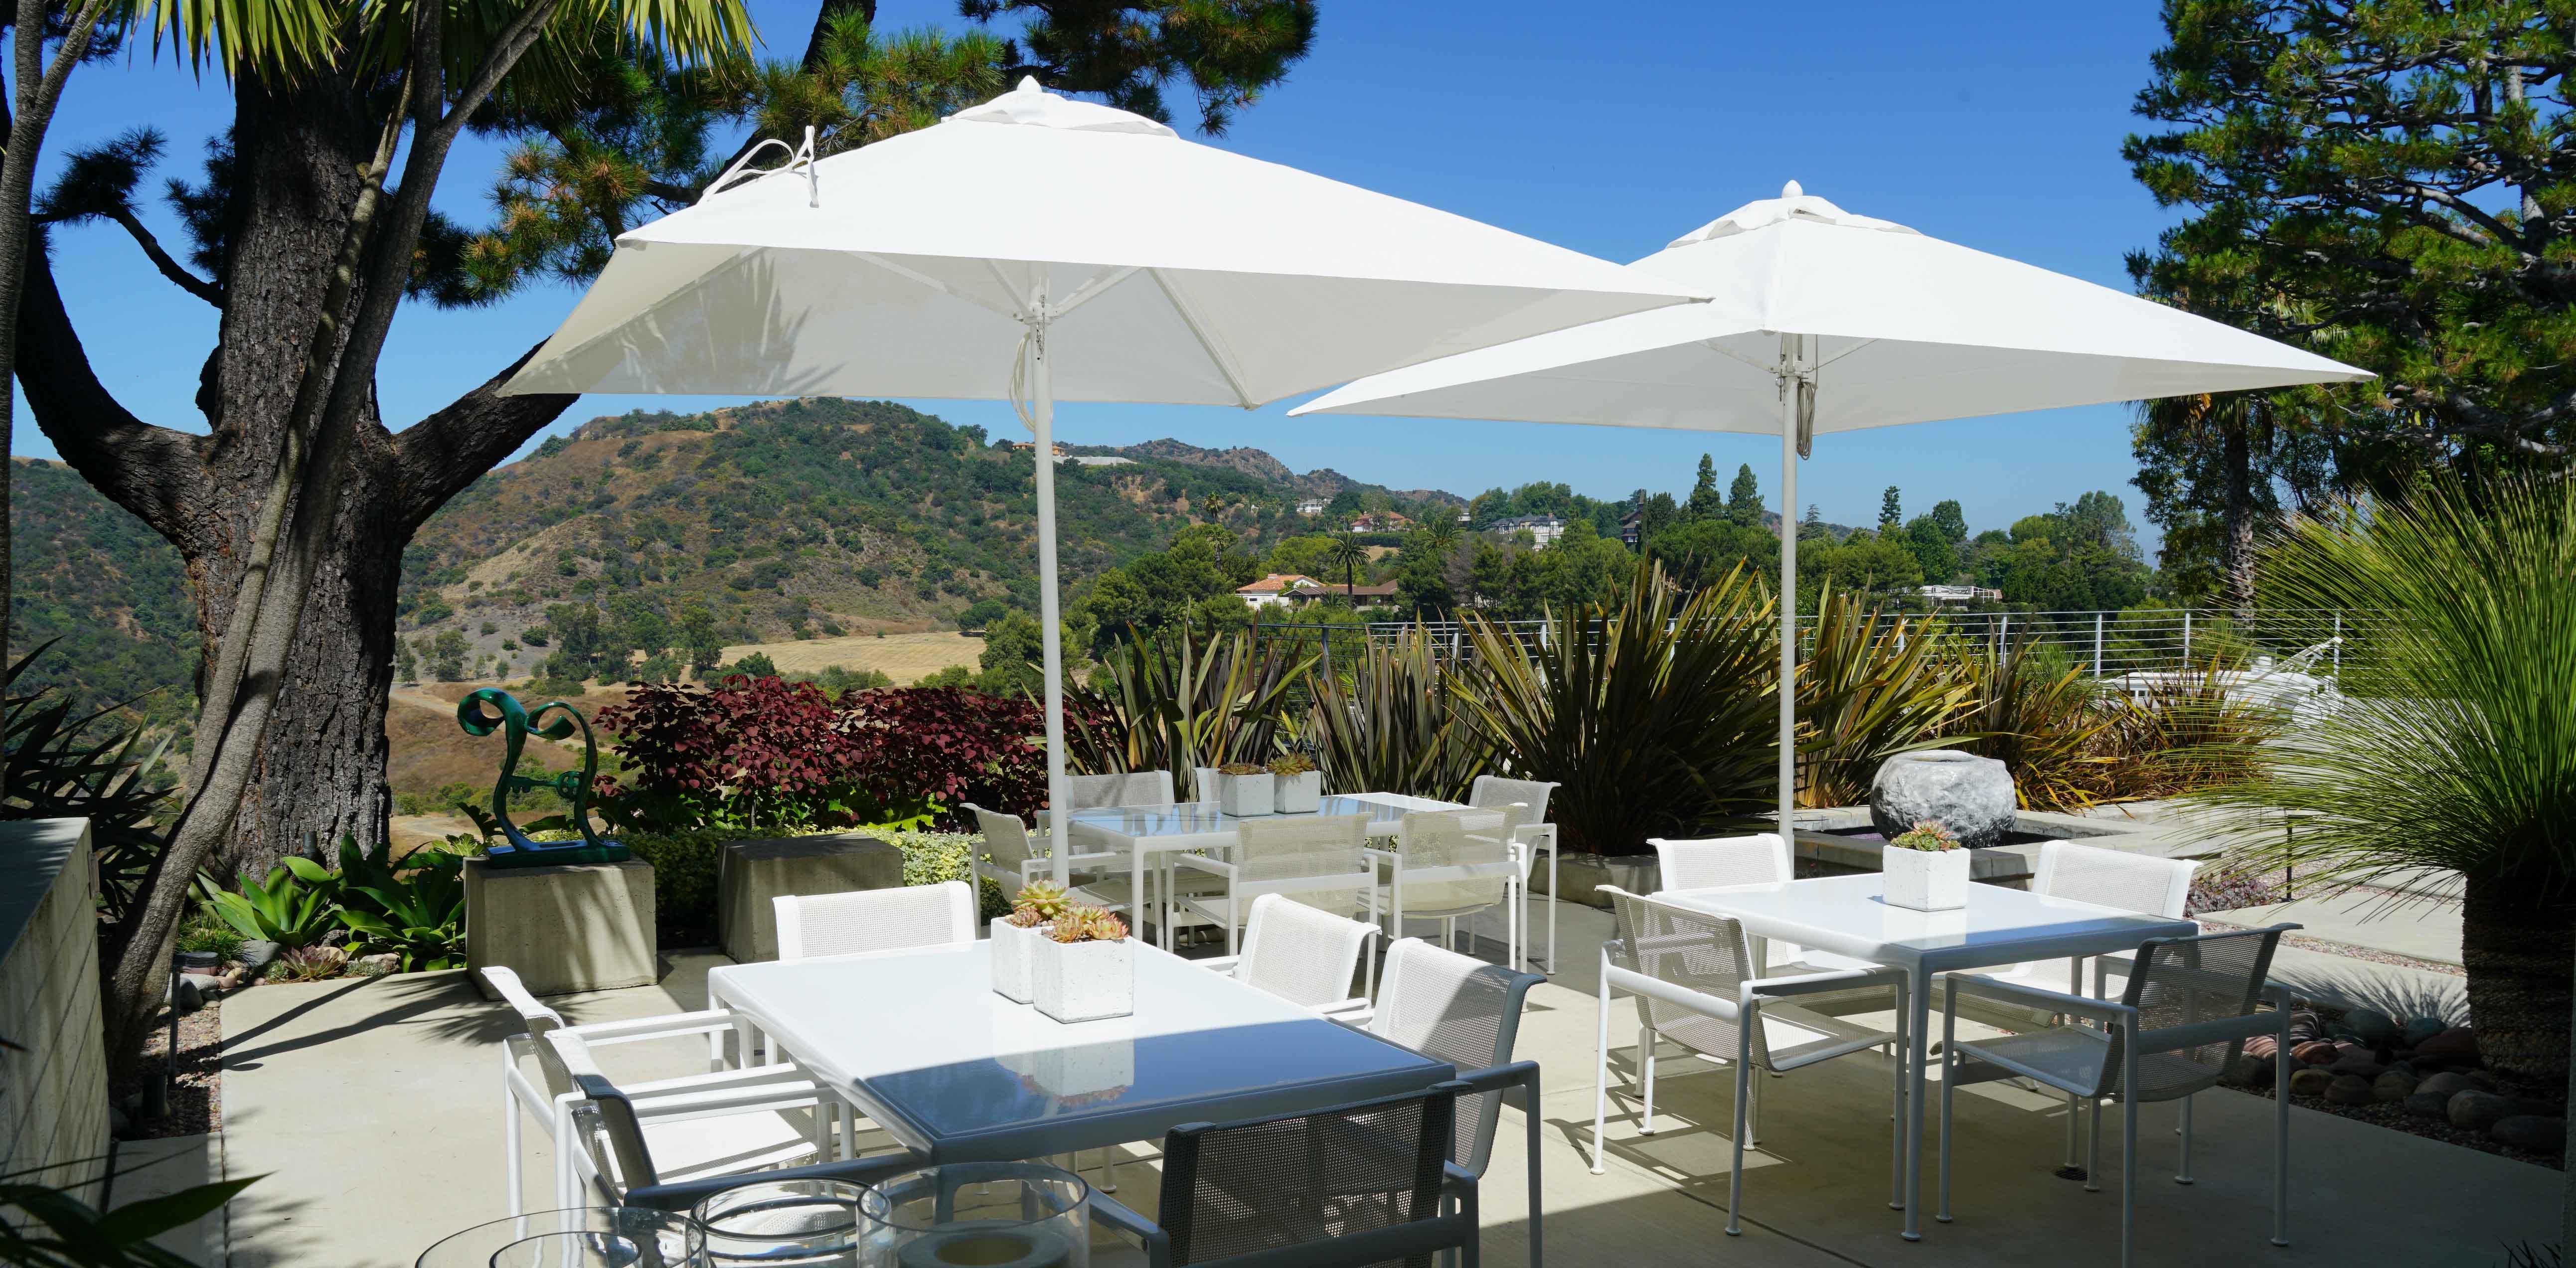 Image of Paseo umbrellas over dining tables